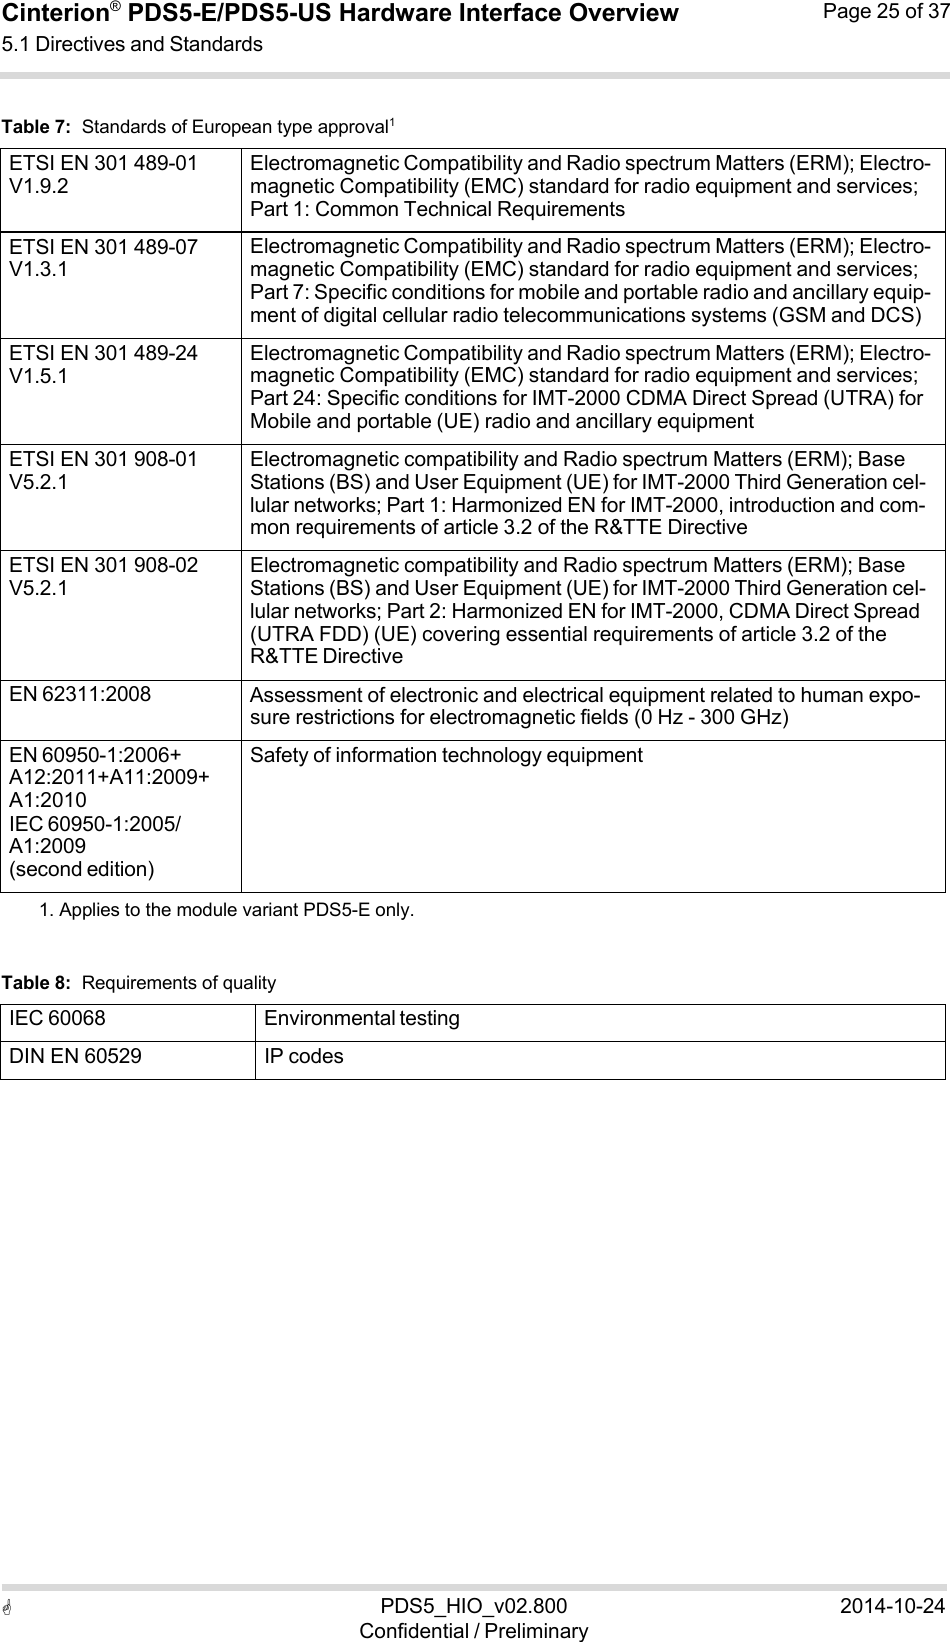  PDS5_HIO_v02.800Confidential / Preliminary2014-10-24Cinterion®  PDS5-E/PDS5-US Hardware Interface Overview5.1 Directives and Standards Page 25 of 37   Table 7:  Standards of European type approval1  ETSI EN 301 489-01 V1.9.2 Electromagnetic Compatibility and Radio spectrum Matters (ERM); Electro- magnetic Compatibility (EMC) standard for radio equipment and services; Part 1: Common Technical Requirements ETSI EN 301 489-07 V1.3.1 Electromagnetic Compatibility and Radio spectrum Matters (ERM); Electro- magnetic Compatibility (EMC) standard for radio equipment and services; Part 7: Specific conditions for mobile and portable radio and ancillary equip- ment of digital cellular radio telecommunications systems (GSM and DCS) ETSI EN 301 489-24 V1.5.1 Electromagnetic Compatibility and Radio spectrum Matters (ERM); Electro- magnetic Compatibility (EMC) standard for radio equipment and services; Part 24: Specific conditions for IMT-2000 CDMA Direct Spread (UTRA) for Mobile and portable (UE) radio and ancillary equipment ETSI EN 301 908-01 V5.2.1 Electromagnetic compatibility and Radio spectrum Matters (ERM); Base Stations (BS) and User Equipment (UE) for IMT-2000 Third Generation cel- lular networks; Part 1: Harmonized EN for IMT-2000, introduction and com- mon requirements of article 3.2 of the R&amp;TTE Directive ETSI EN 301 908-02 V5.2.1 Electromagnetic compatibility and Radio spectrum Matters (ERM); Base Stations (BS) and User Equipment (UE) for IMT-2000 Third Generation cel- lular networks; Part 2: Harmonized EN for IMT-2000, CDMA Direct Spread (UTRA FDD) (UE) covering essential requirements of article 3.2 of the R&amp;TTE Directive EN 62311:2008 Assessment of electronic and electrical equipment related to human expo- sure restrictions for electromagnetic fields (0 Hz - 300 GHz) EN 60950-1:2006+ A12:2011+A11:2009+ A1:2010 IEC 60950-1:2005/ A1:2009 (second edition) Safety of information technology equipment1. Applies to the module variant PDS5-E only.   Table 8:  Requirements of quality  IEC 60068 Environmental testingDIN EN 60529 IP codes 